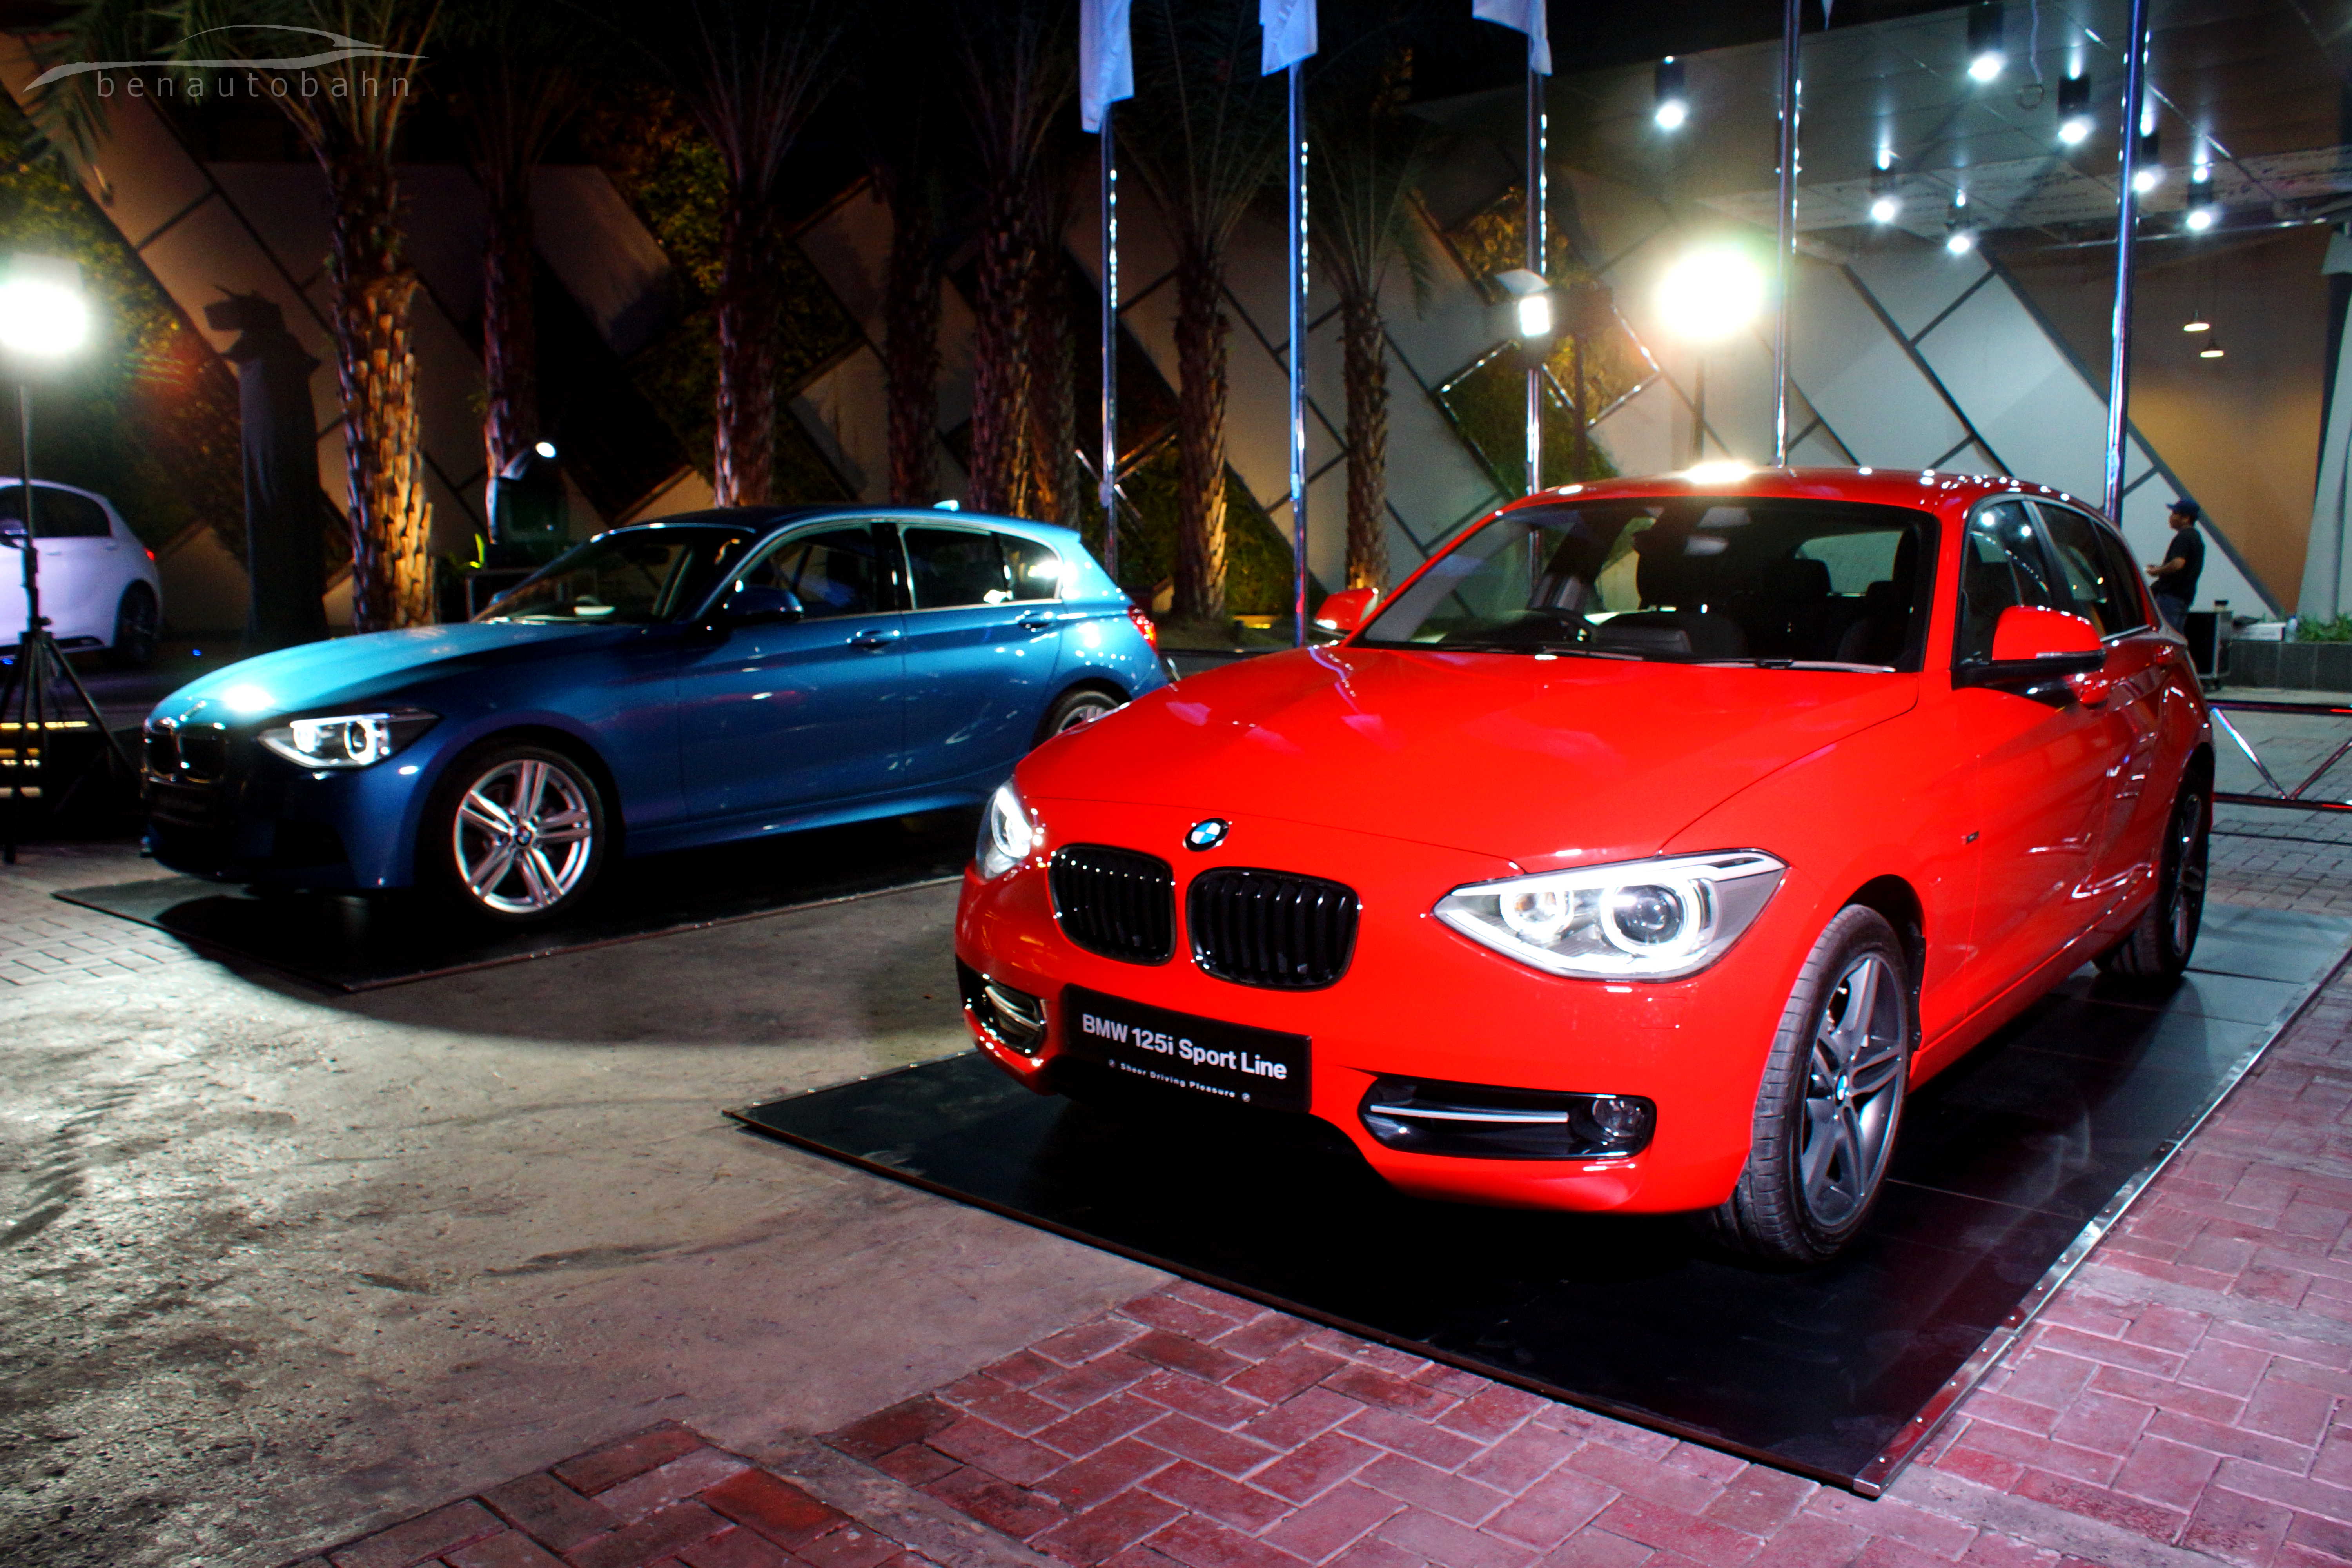 BMW 1-Series launch event